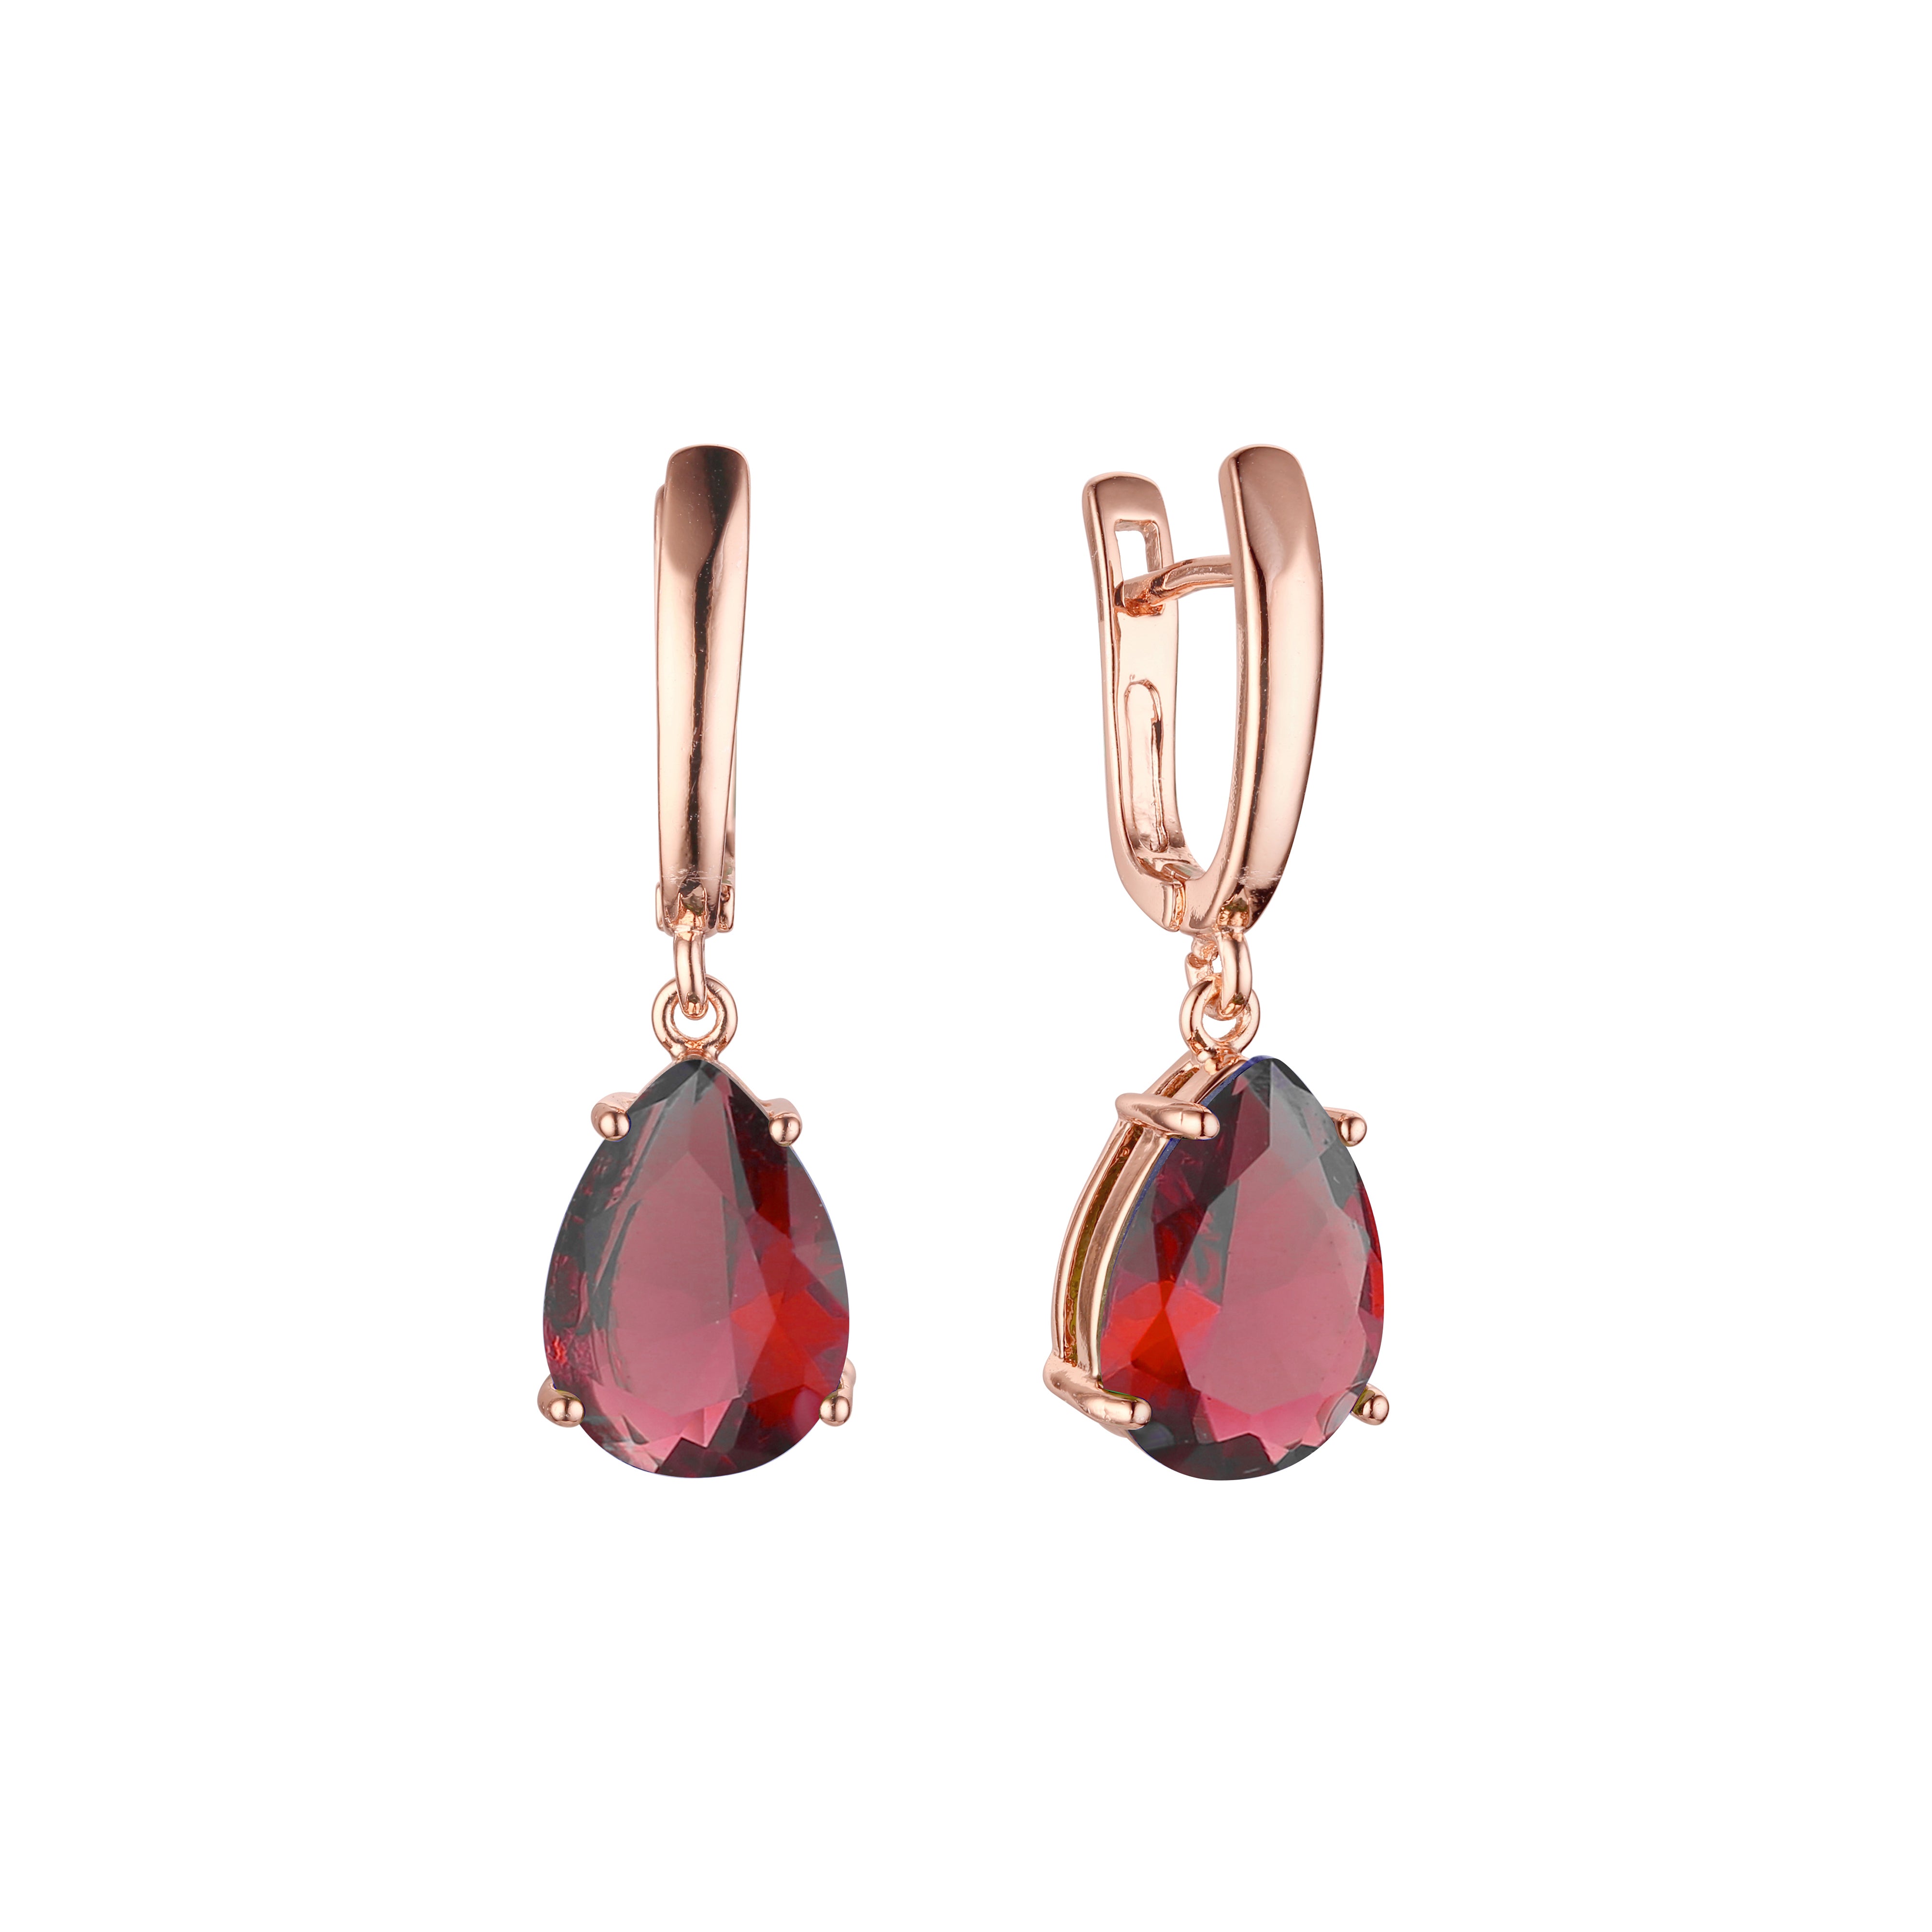 .Teardrop stone earrings in 14K Gold, Rose Gold, White Gold plating colors